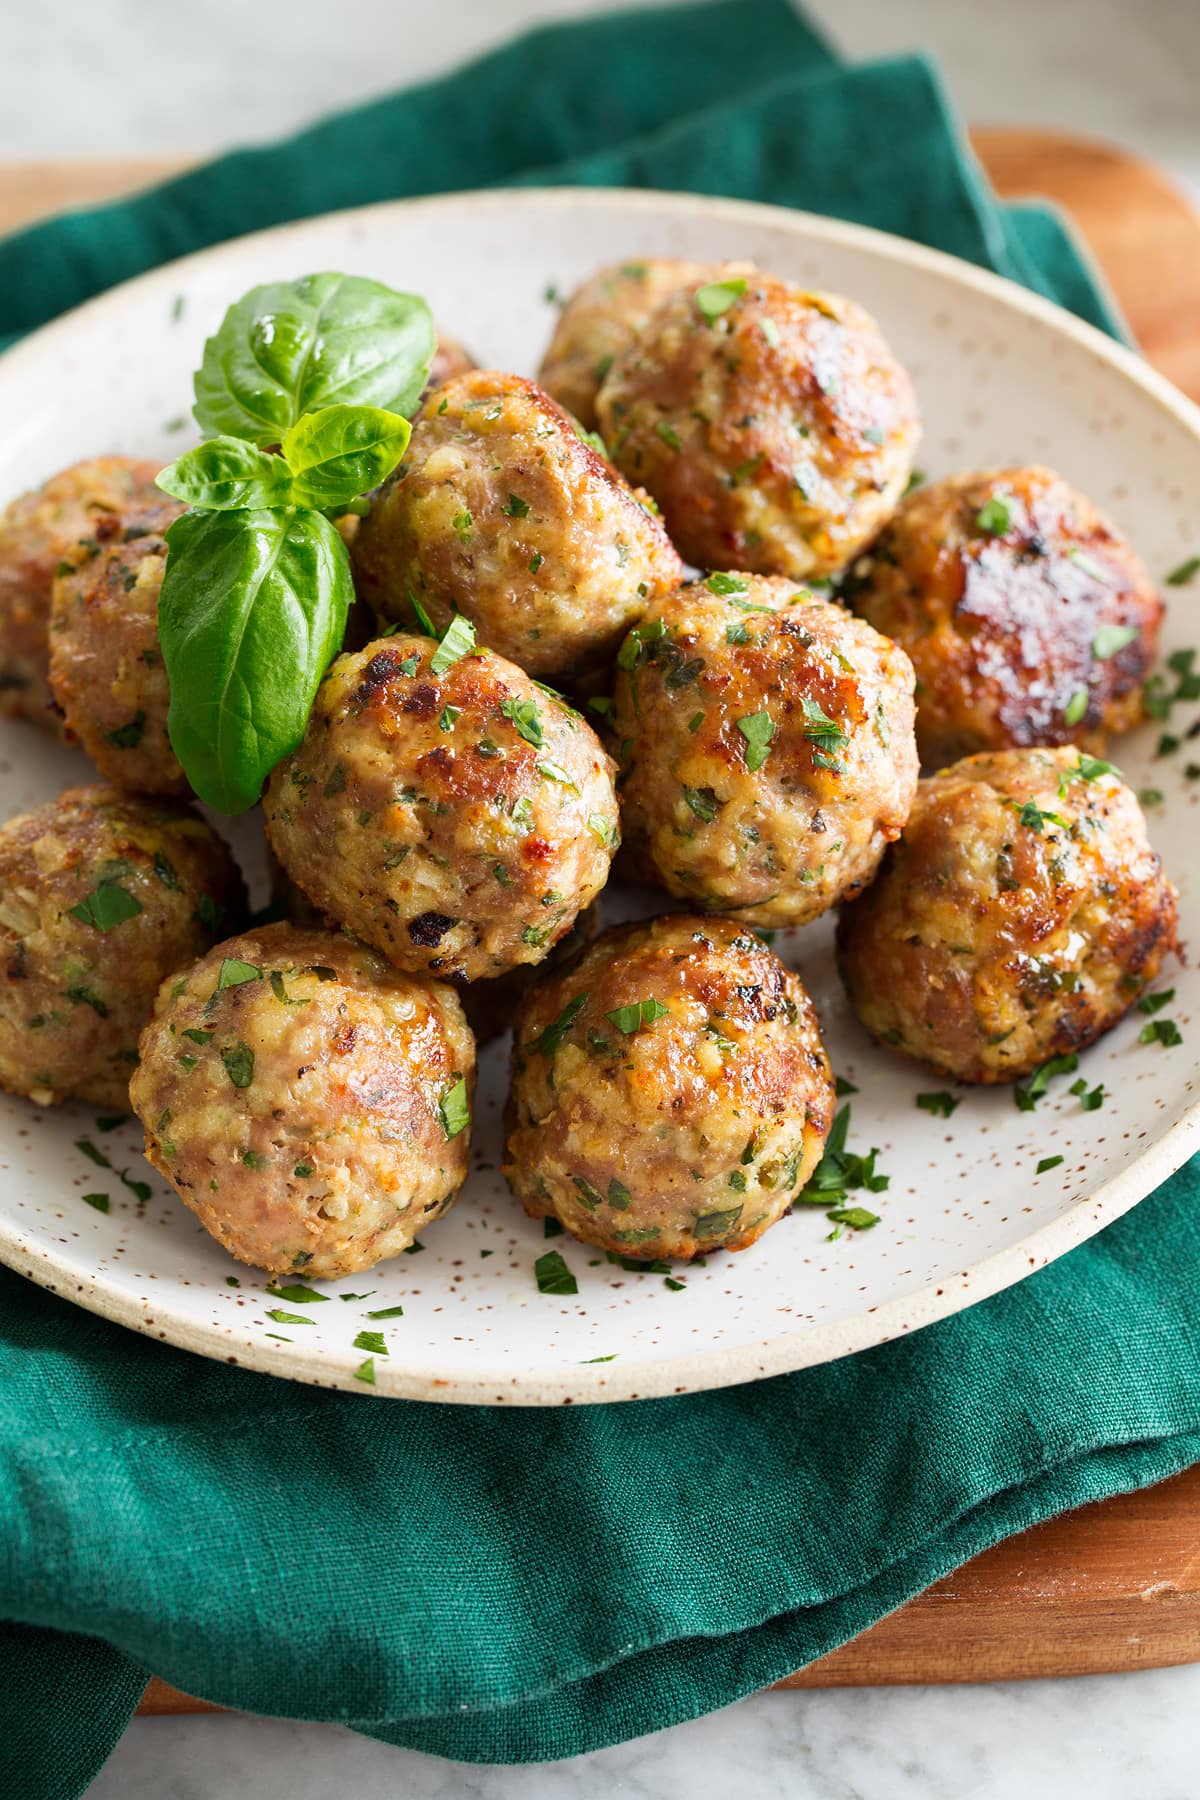 How To Cook Ground Turkey Meatballs In The Oven